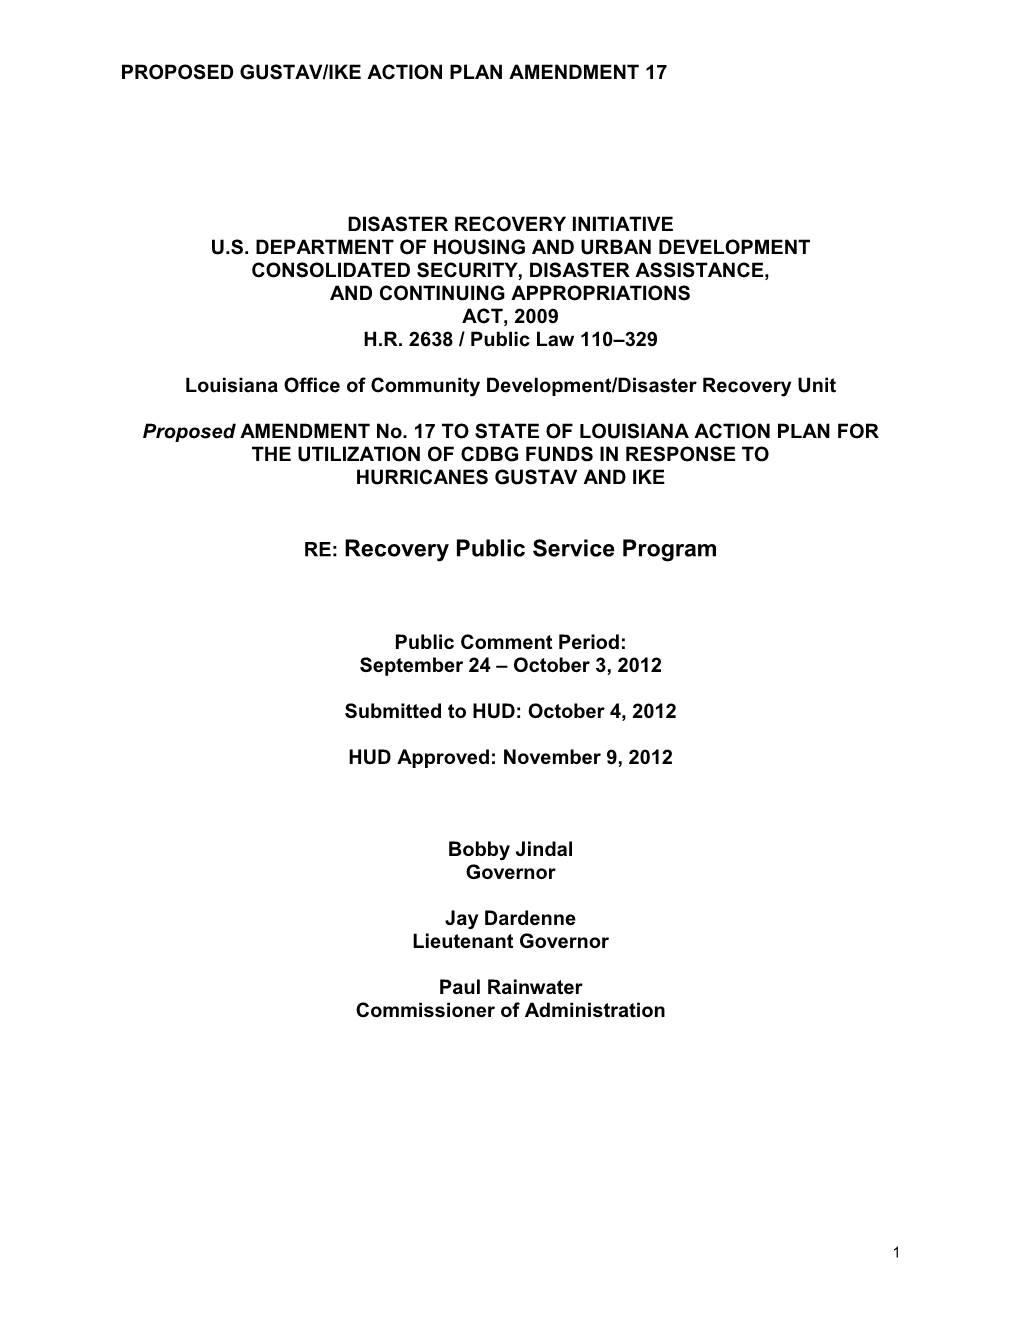 Amendment to State of Louisiana Action Plan for Disaster Recovery –